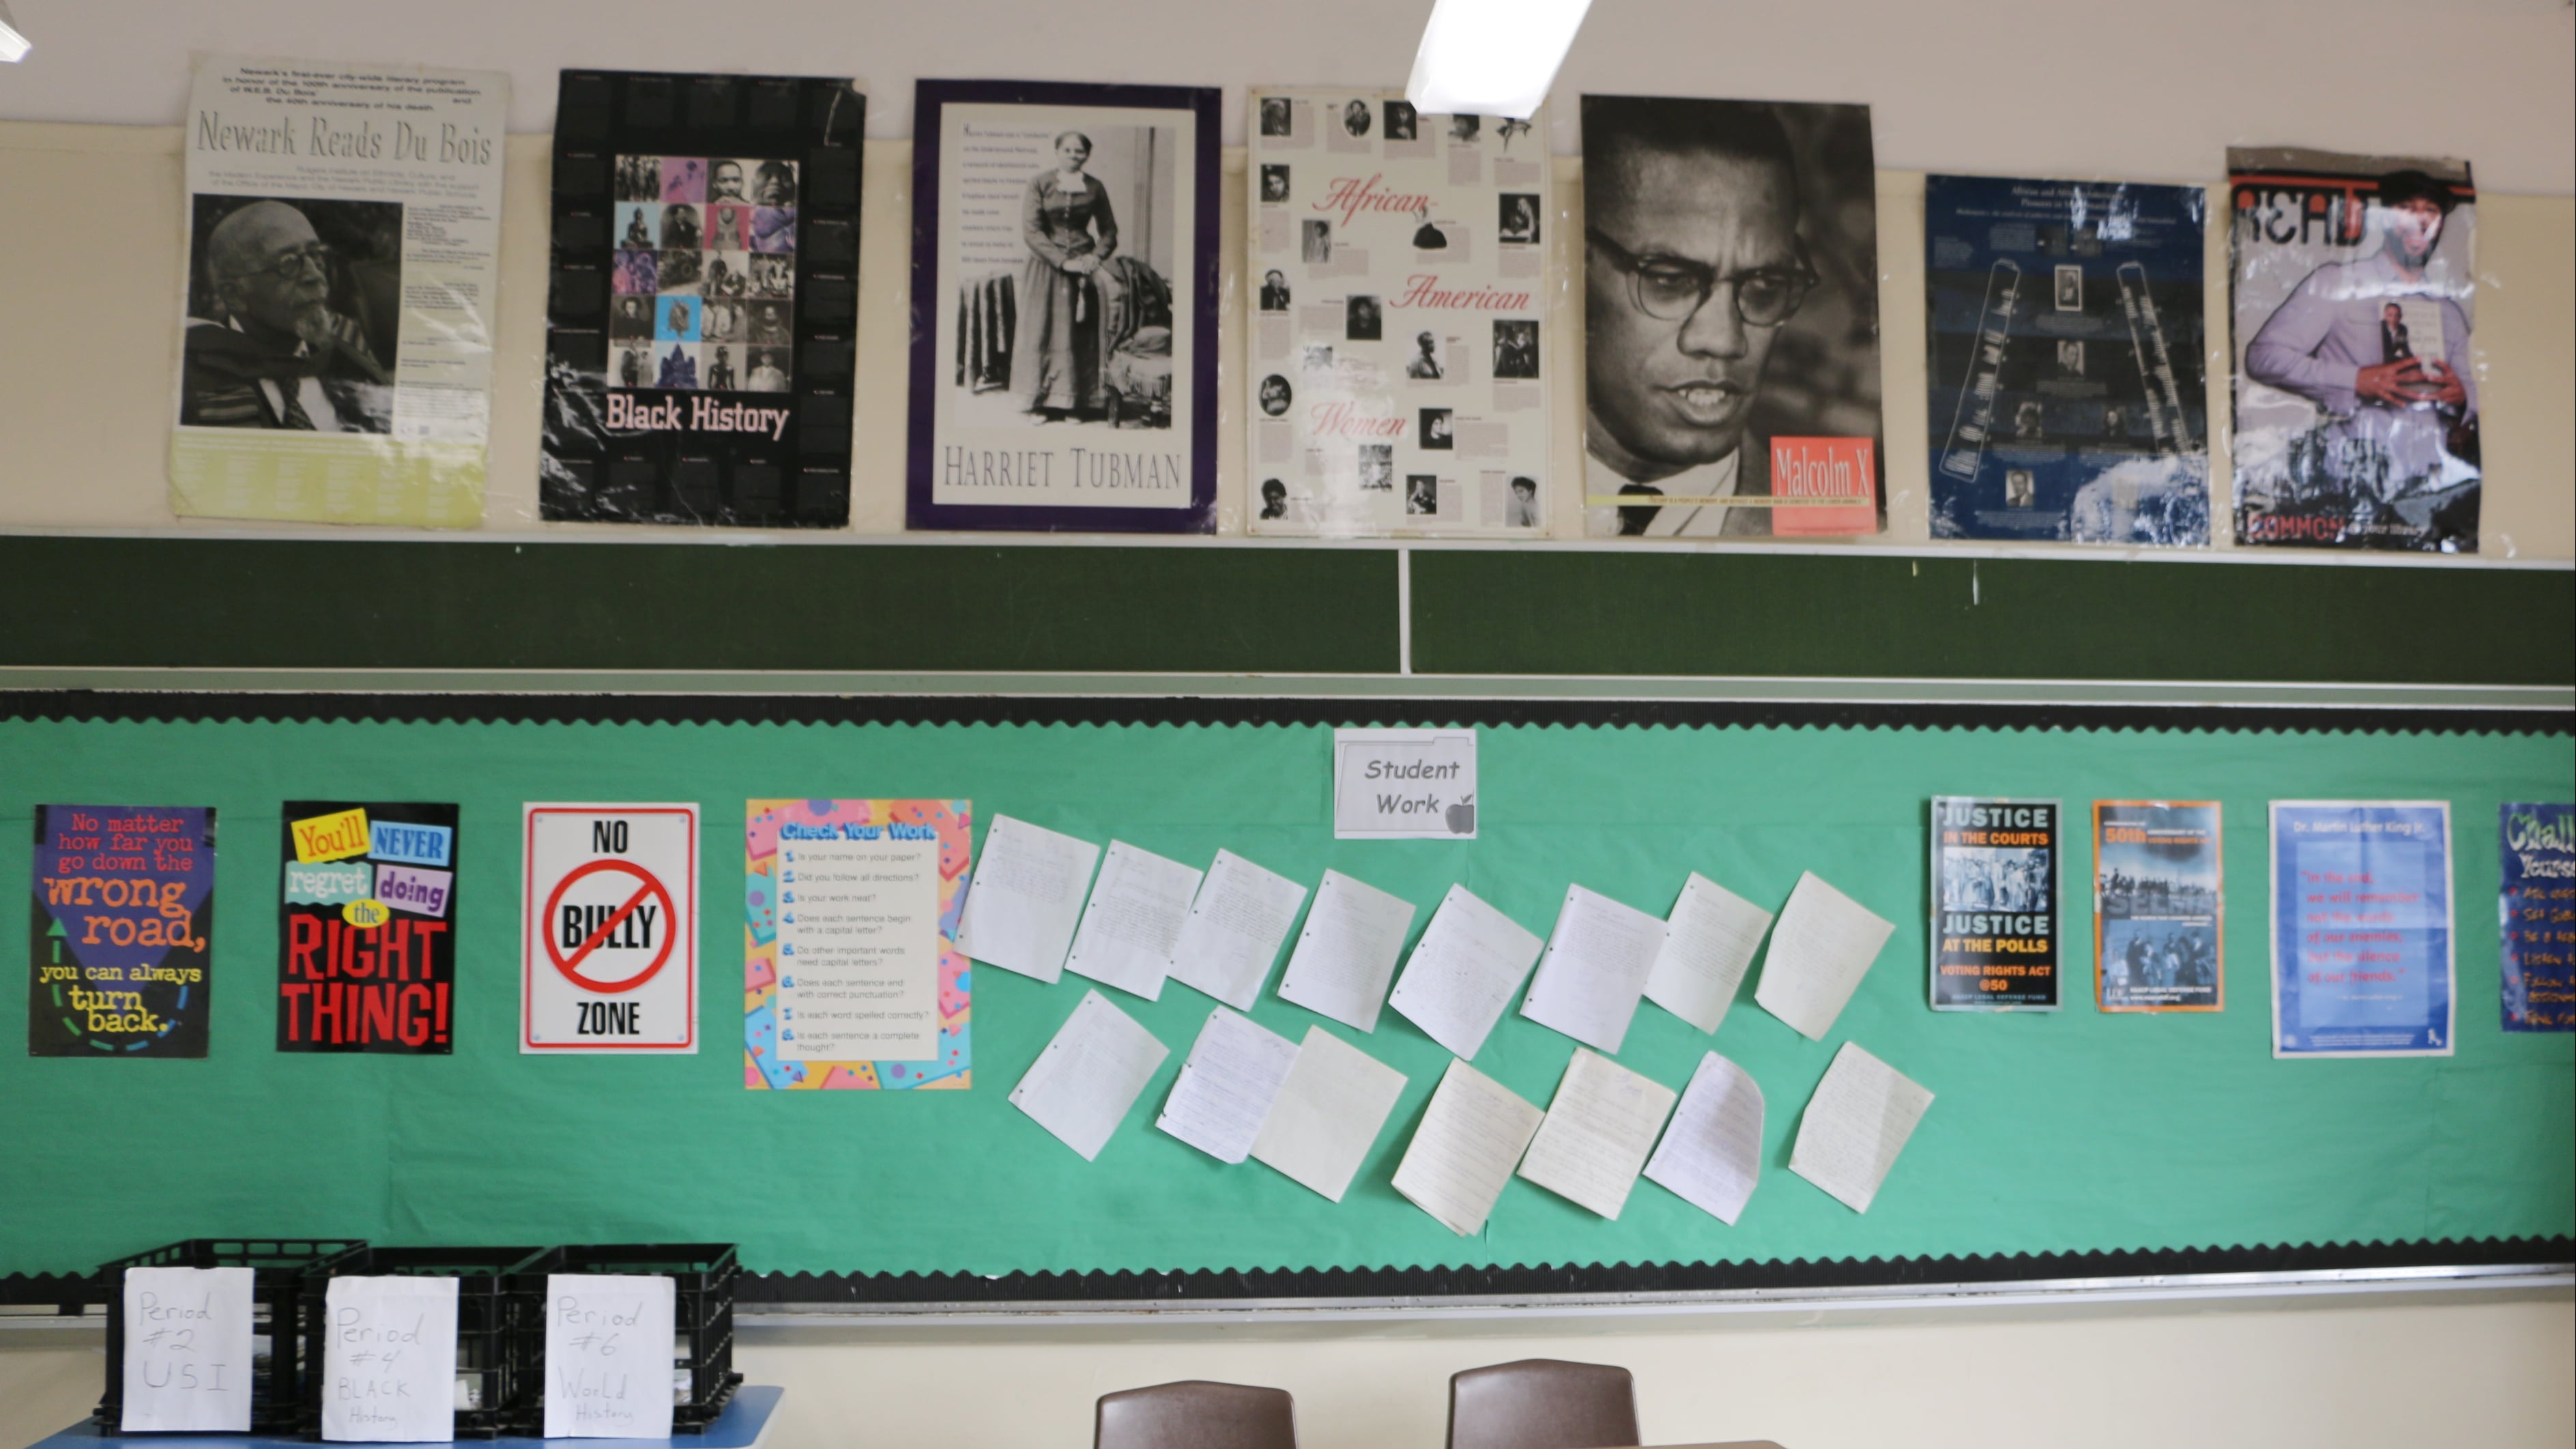 A classroom displays posters of Harriet Tubman, Malcolm X, and others on the wall, along with other instructional materials. Several desks and a small table are also visible.